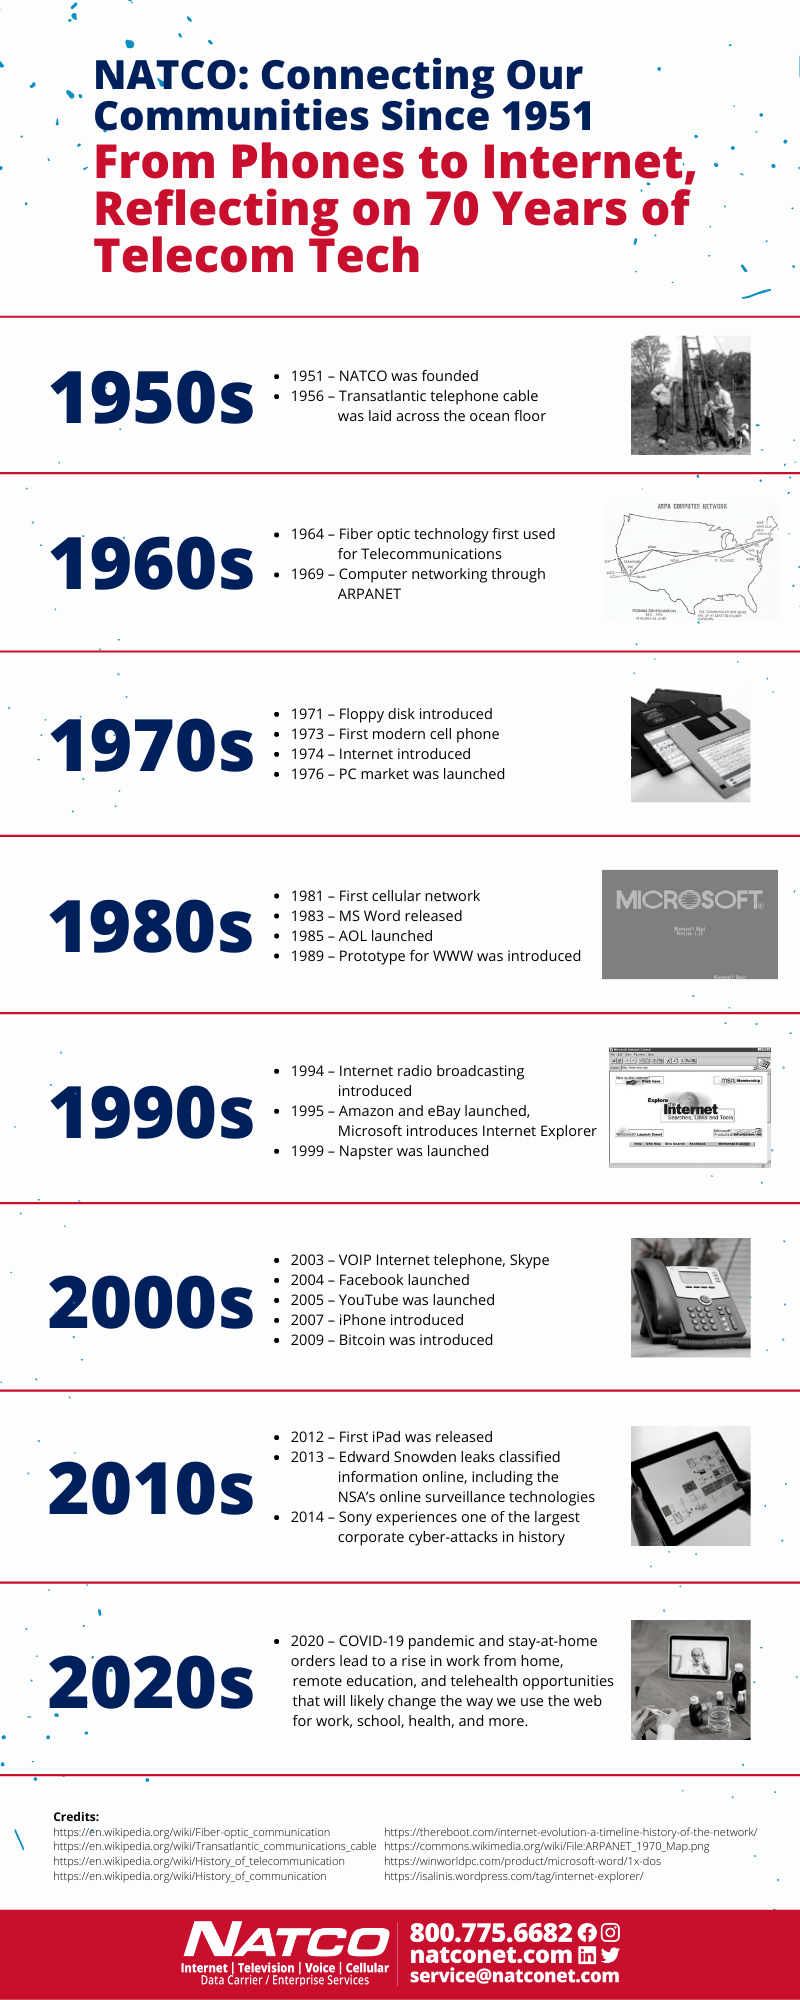 An infographic looking at the past 70 years of telecom history.